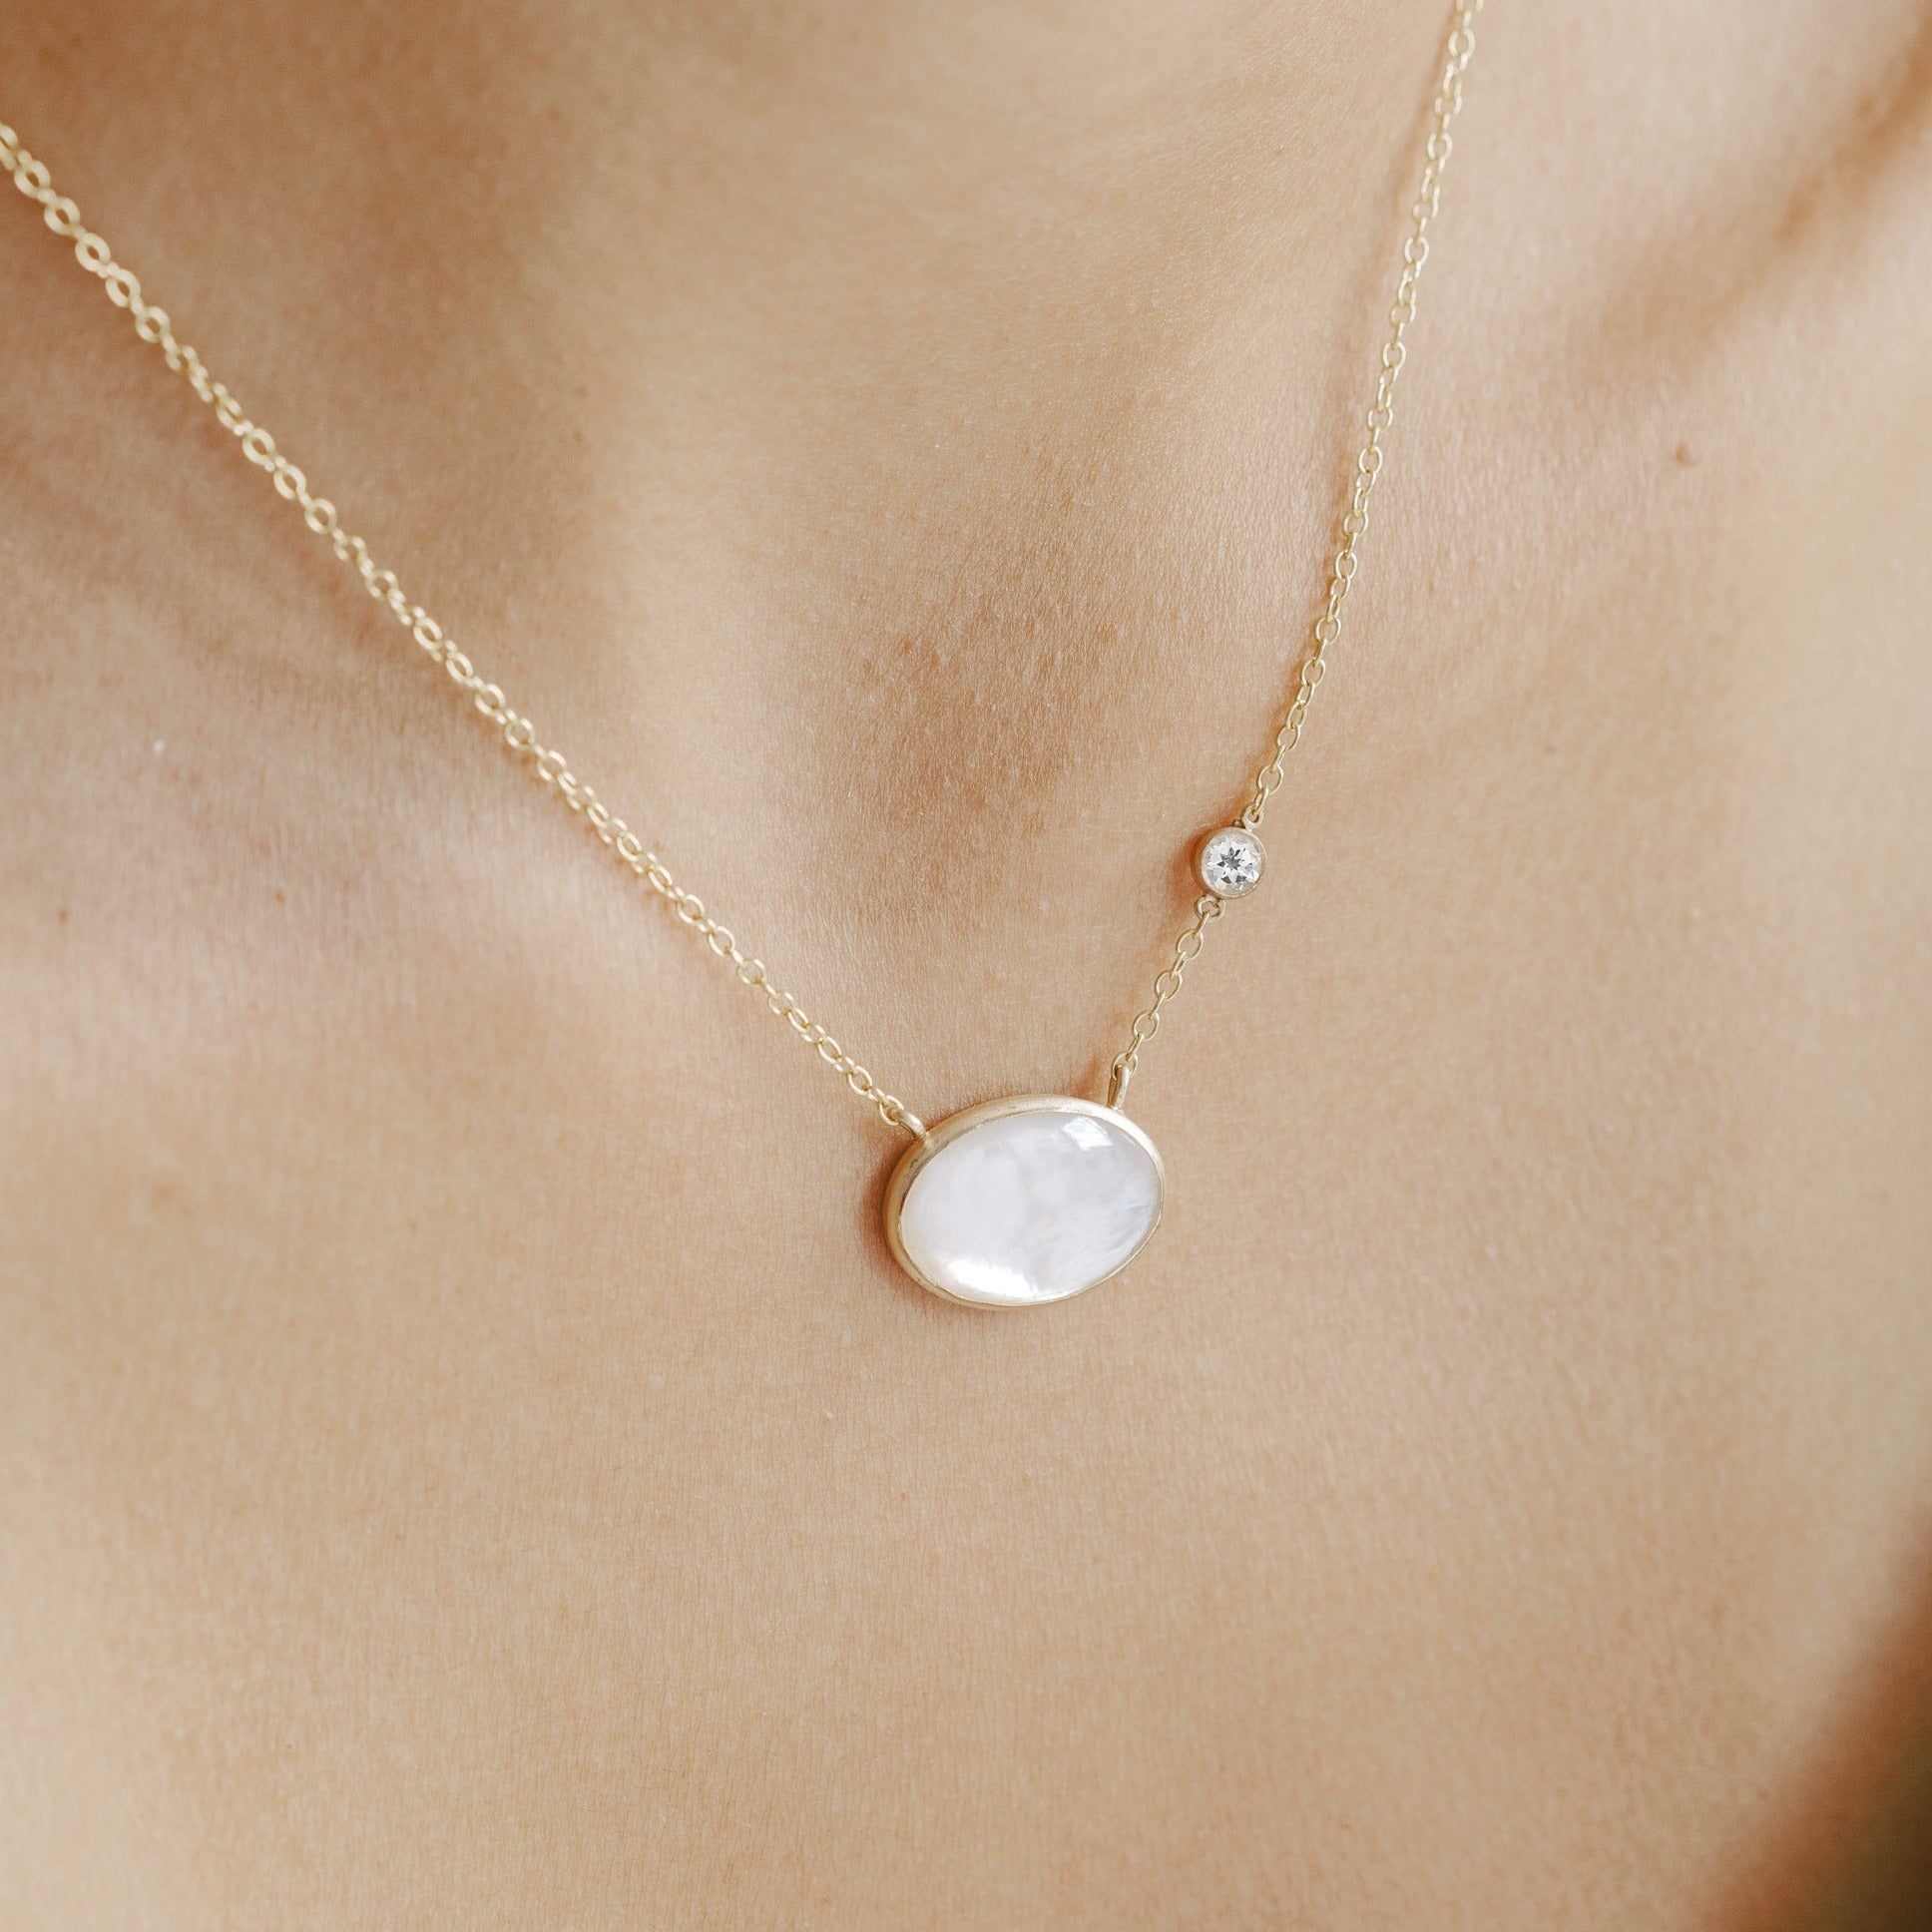 Mother of pearl oval pendant and white topaz stone